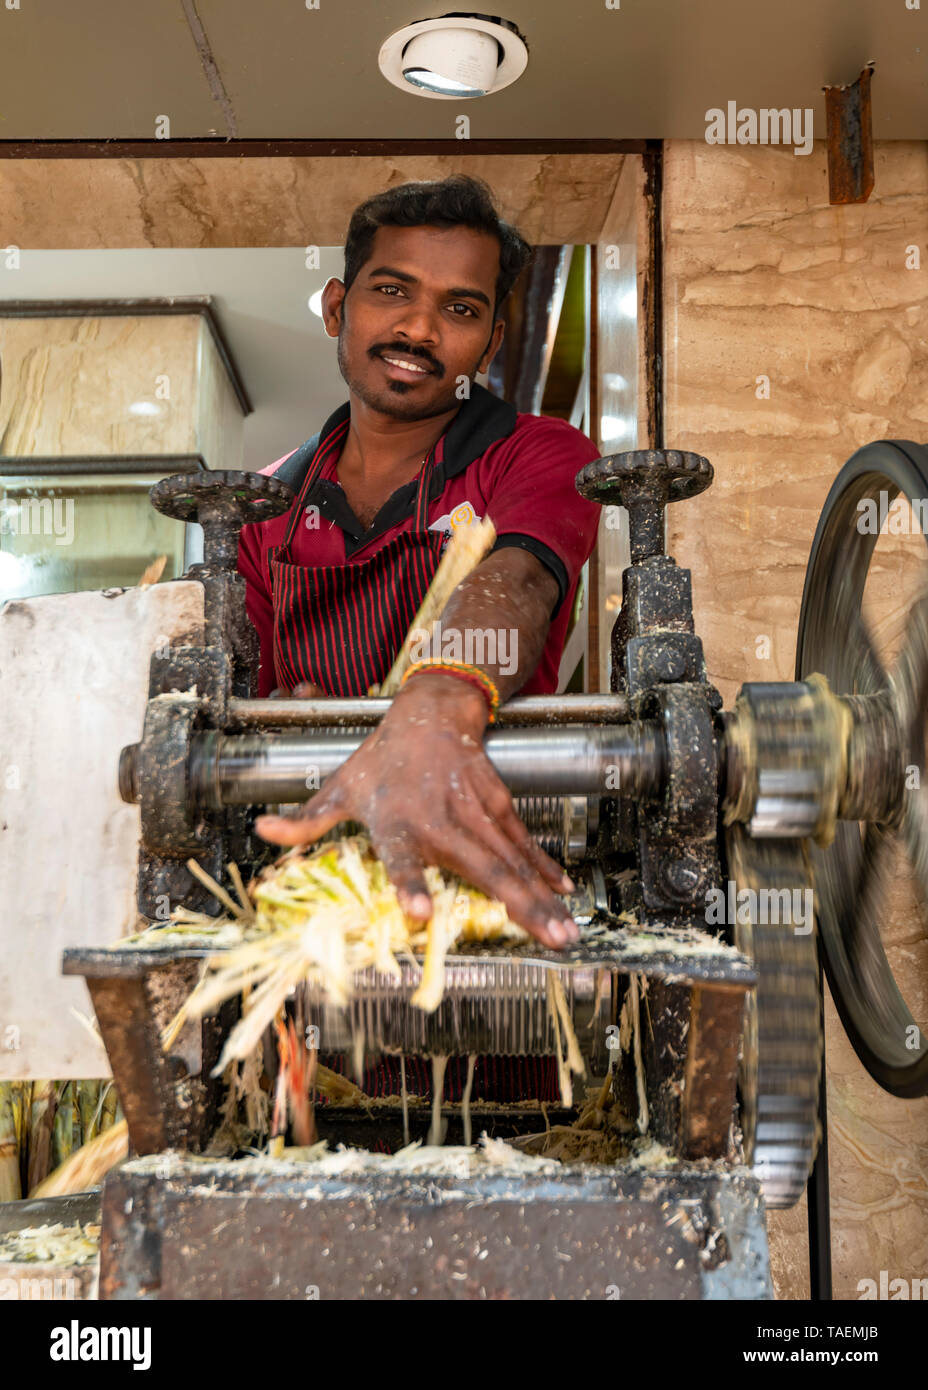 vertical-portrait-of-a-man-using-a-mangle-to-extract-sugarcane-juice-in-india-TAEMJB.jpg